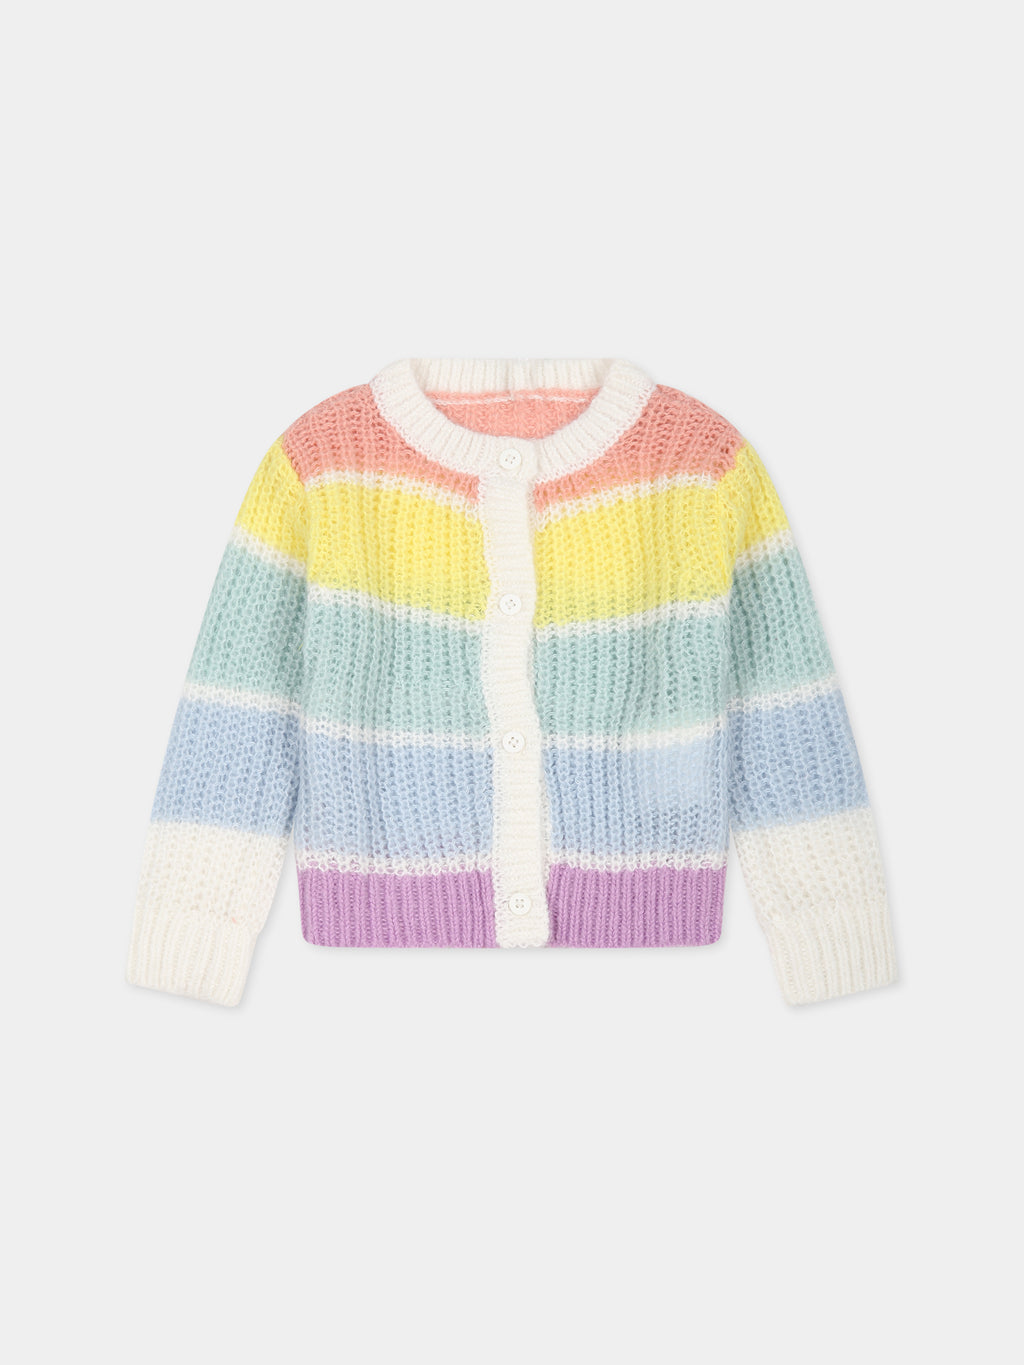 Multicolor cardigan for baby girl